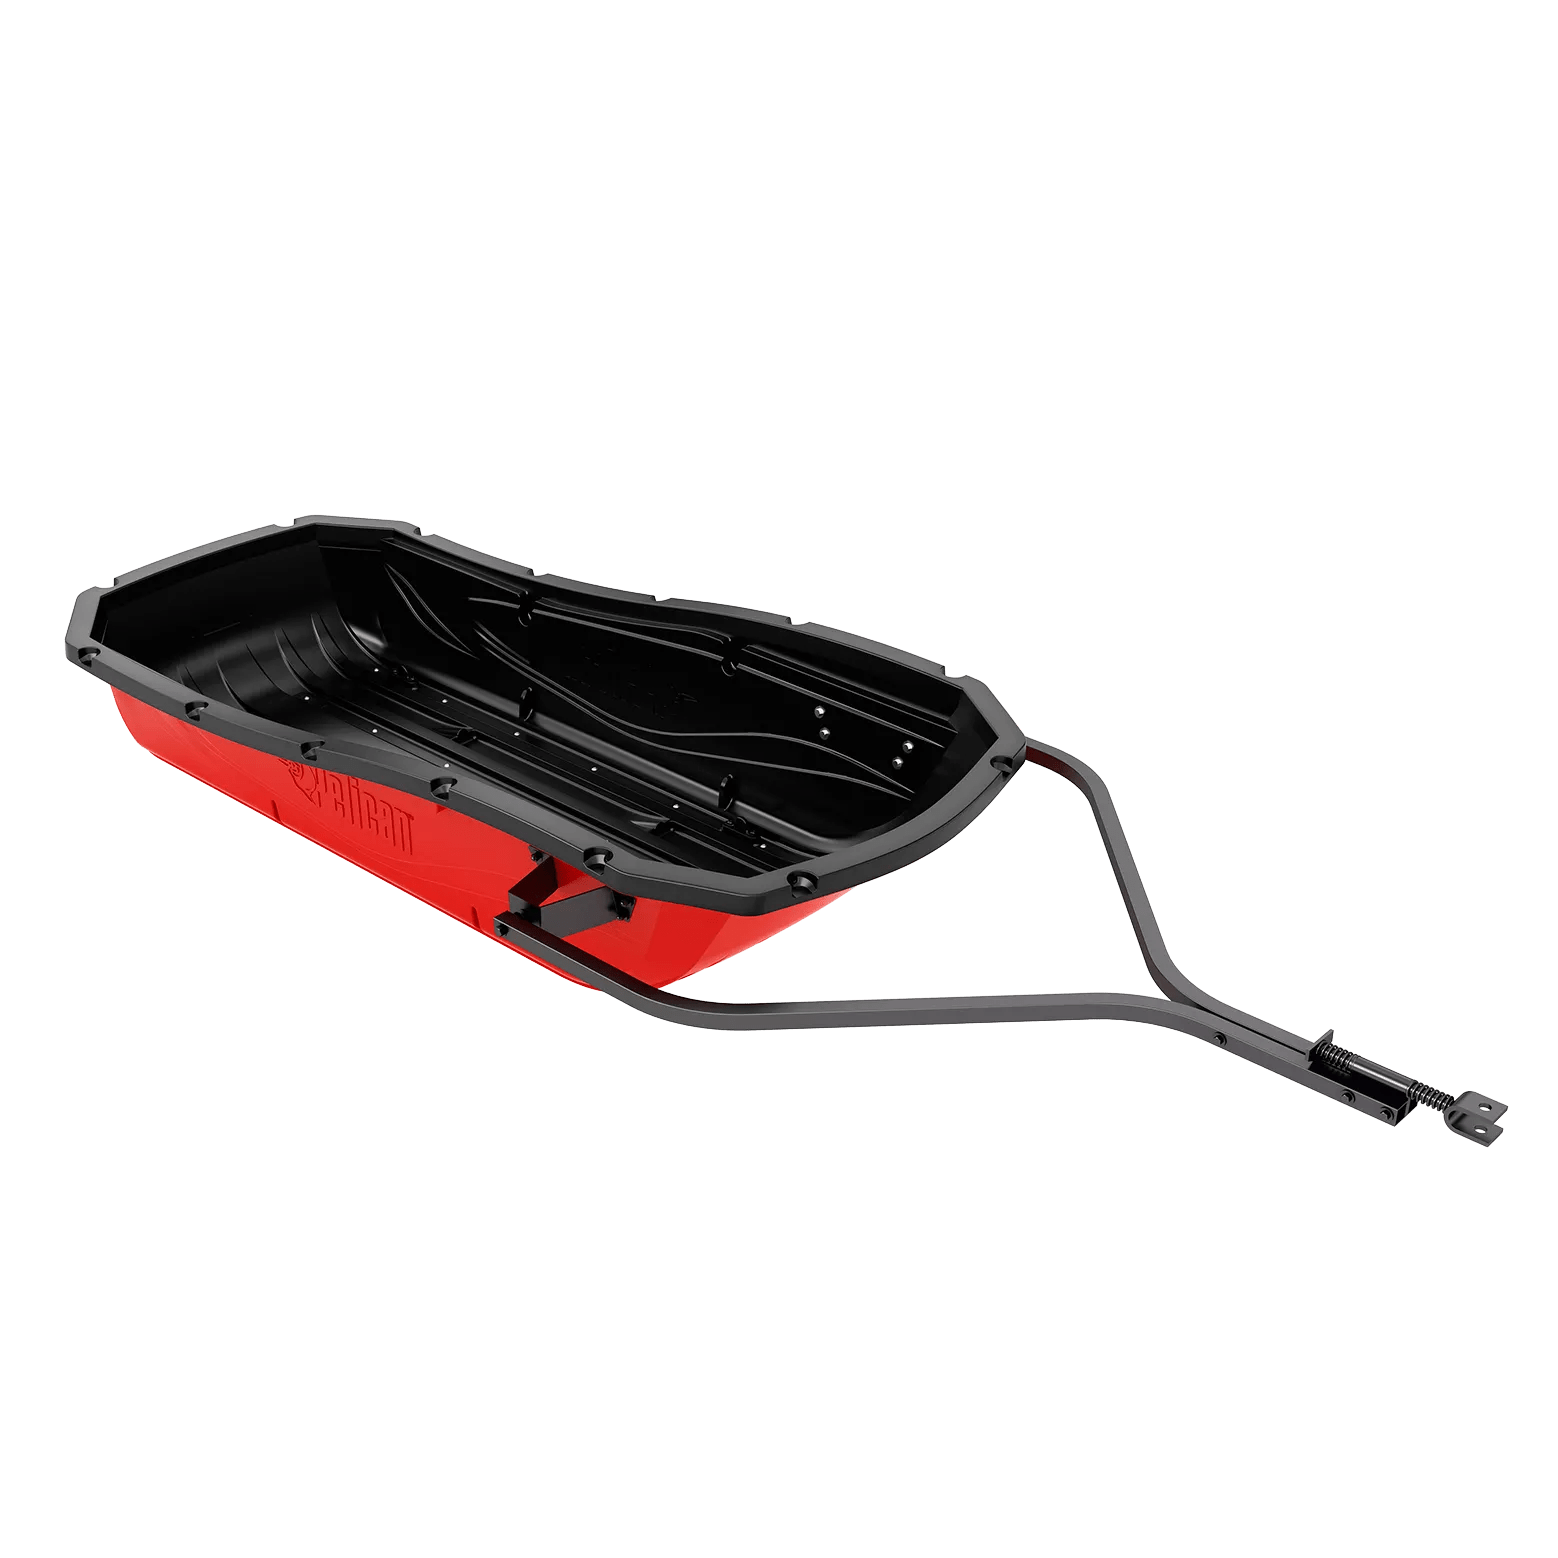 PELICAN - Trek Sport 68 Utility Sled with Ram-X Runners, Tow Hitch, Travel Cover & D-Ring Anchors and Straps - Red - LHT68PA08 - ISO 